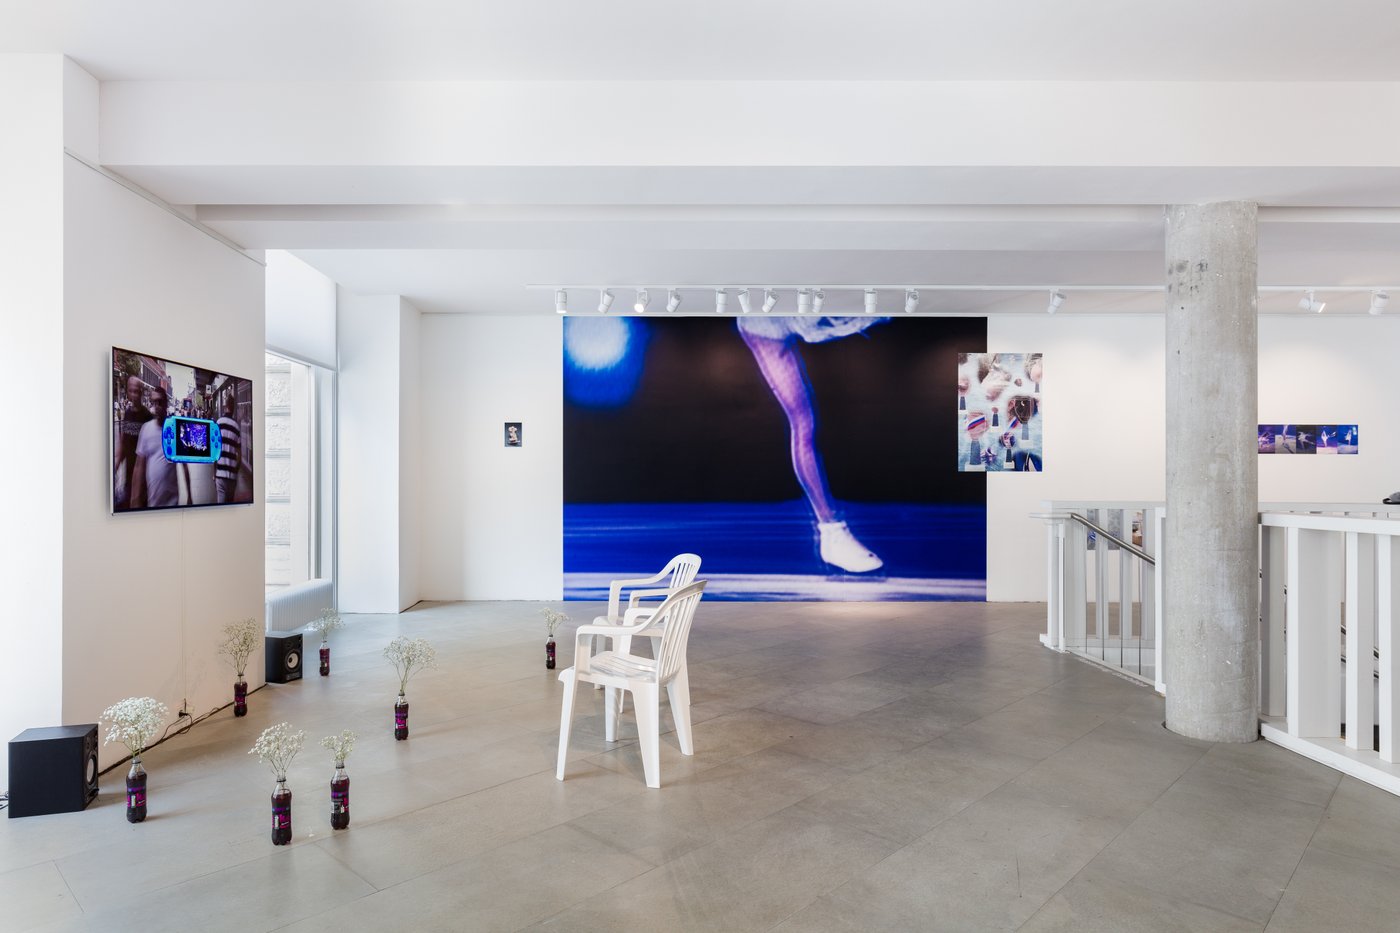 In the exhibition space, Coke bottles with white flowers and two plastic chairs stand in front of a screen. In the background a photo wallpaper with the leg of a skater and other photographic explorations of the theme.